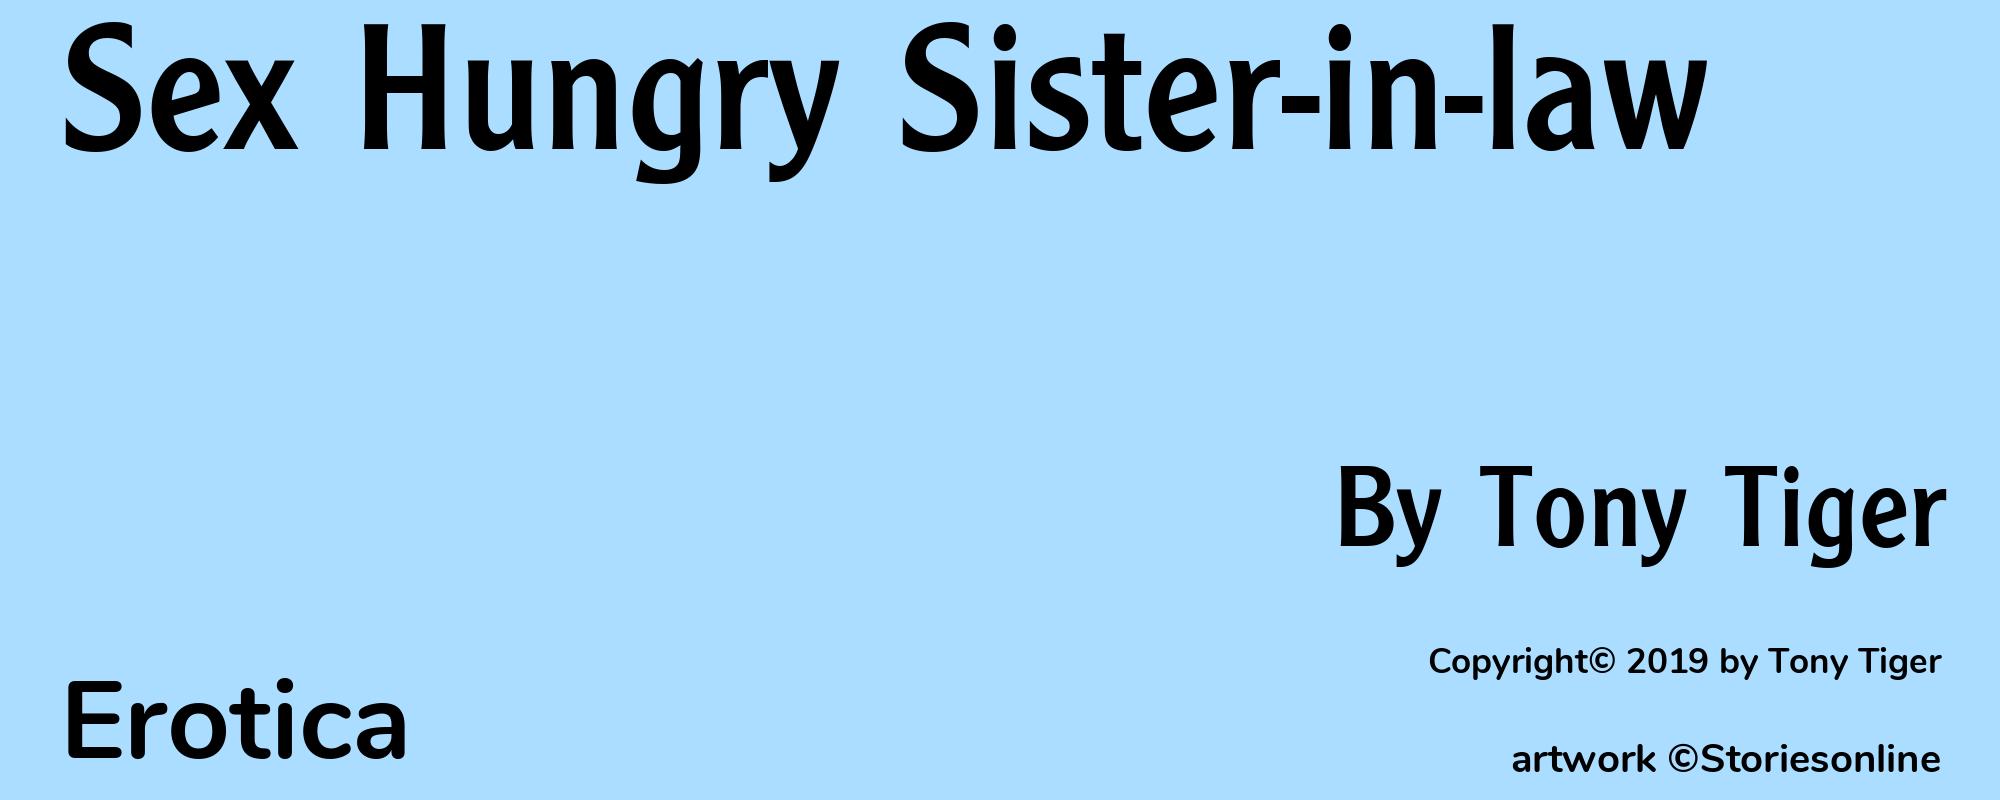 Sex Hungry Sister-in-law - Cover